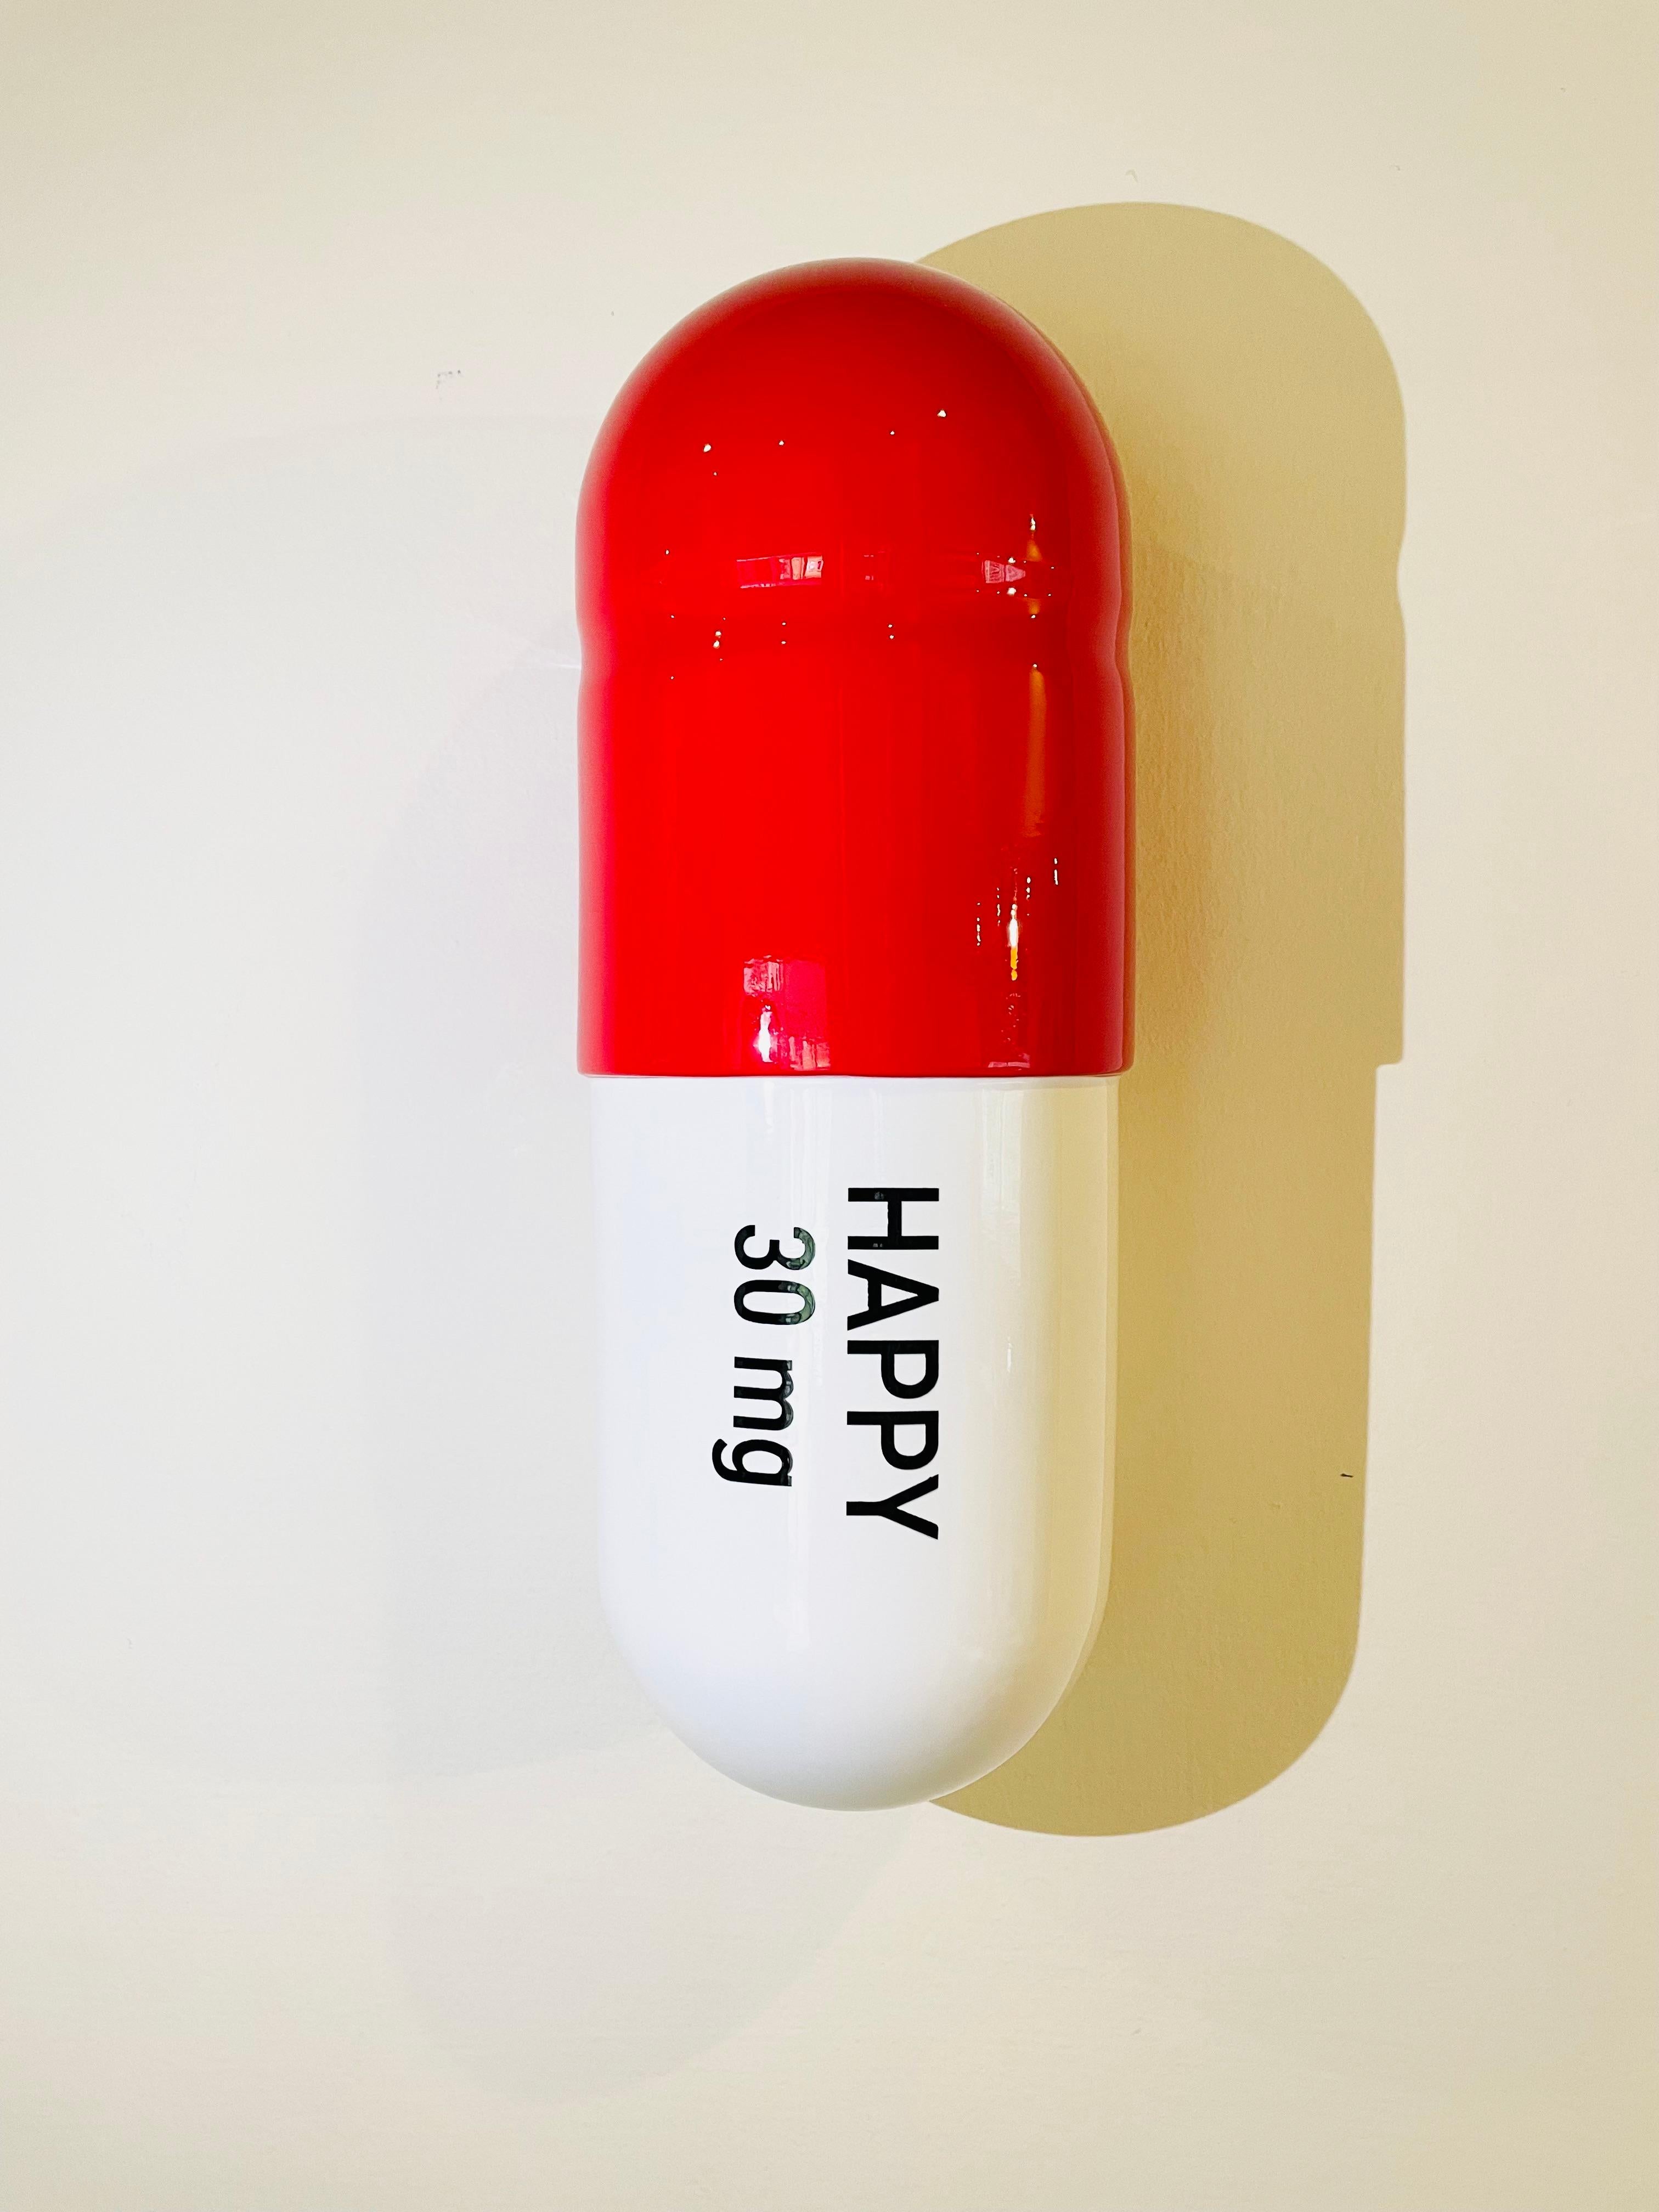 Tal Nehoray Still-Life Sculpture - 30 mg Large Happy pill (Red and White) - figurative sculpture